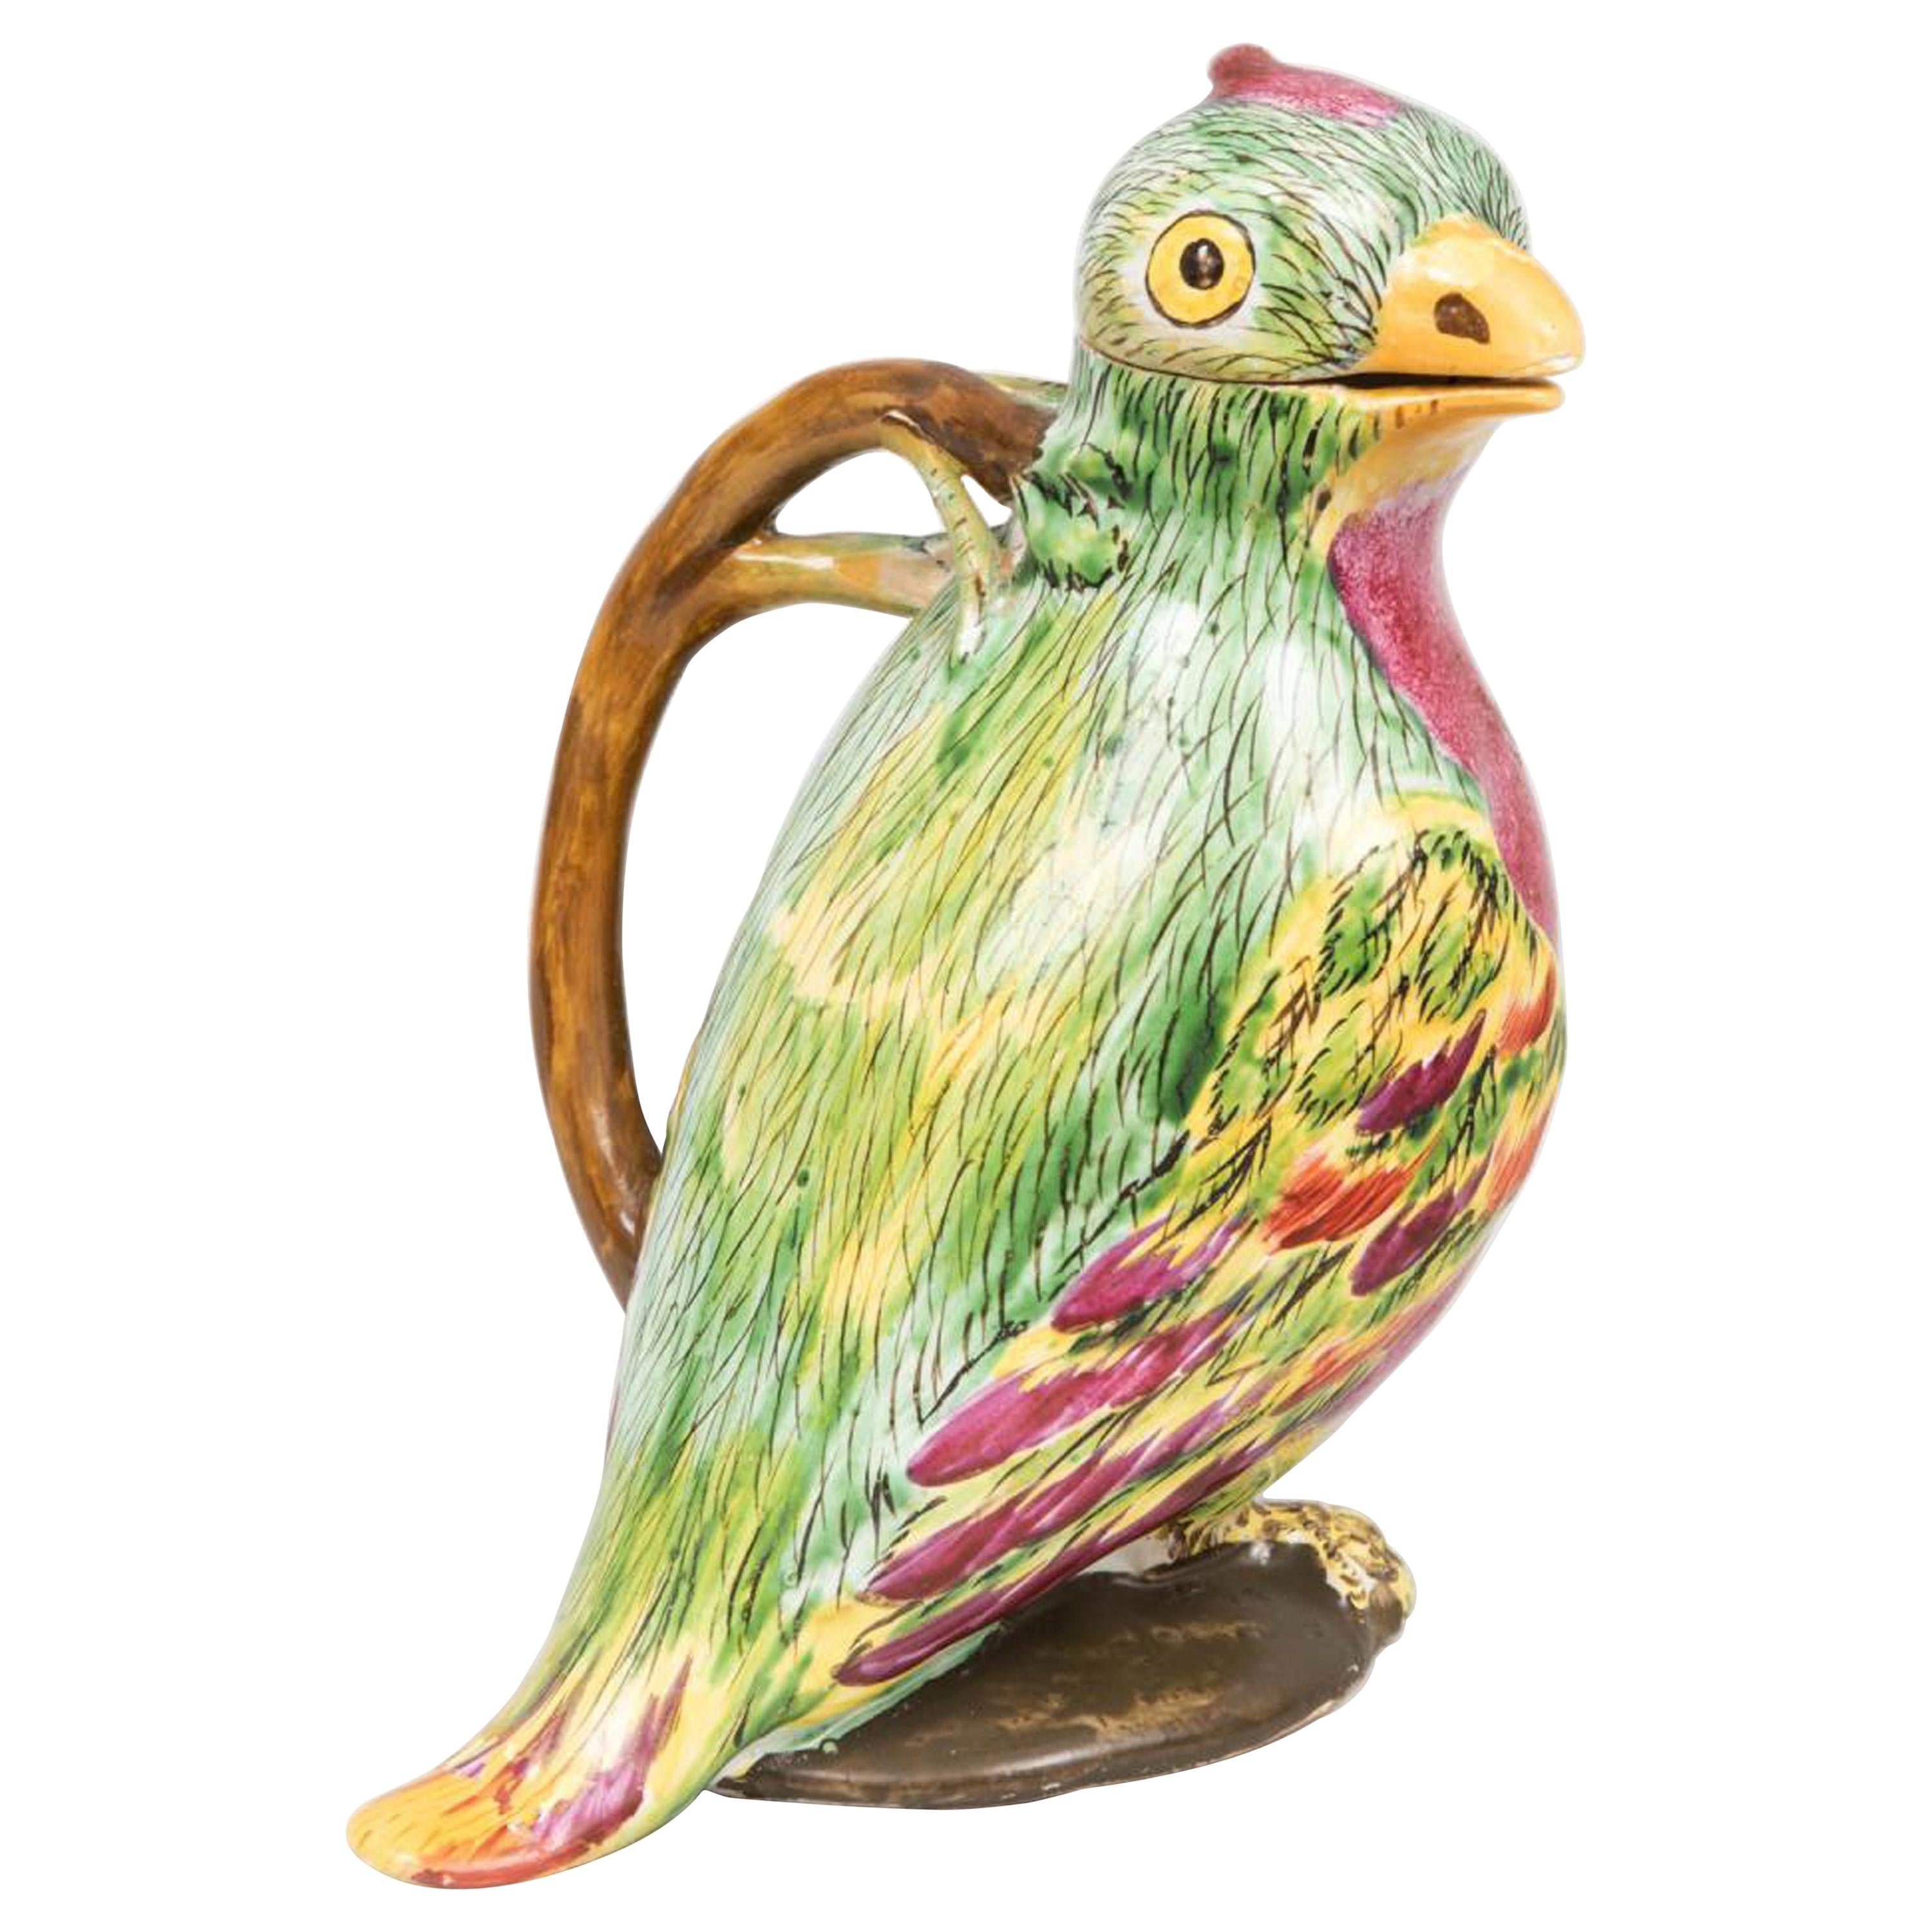 Proskau Faience Tromp L'oeil Jug in the Form of a Parrot, circa 1770